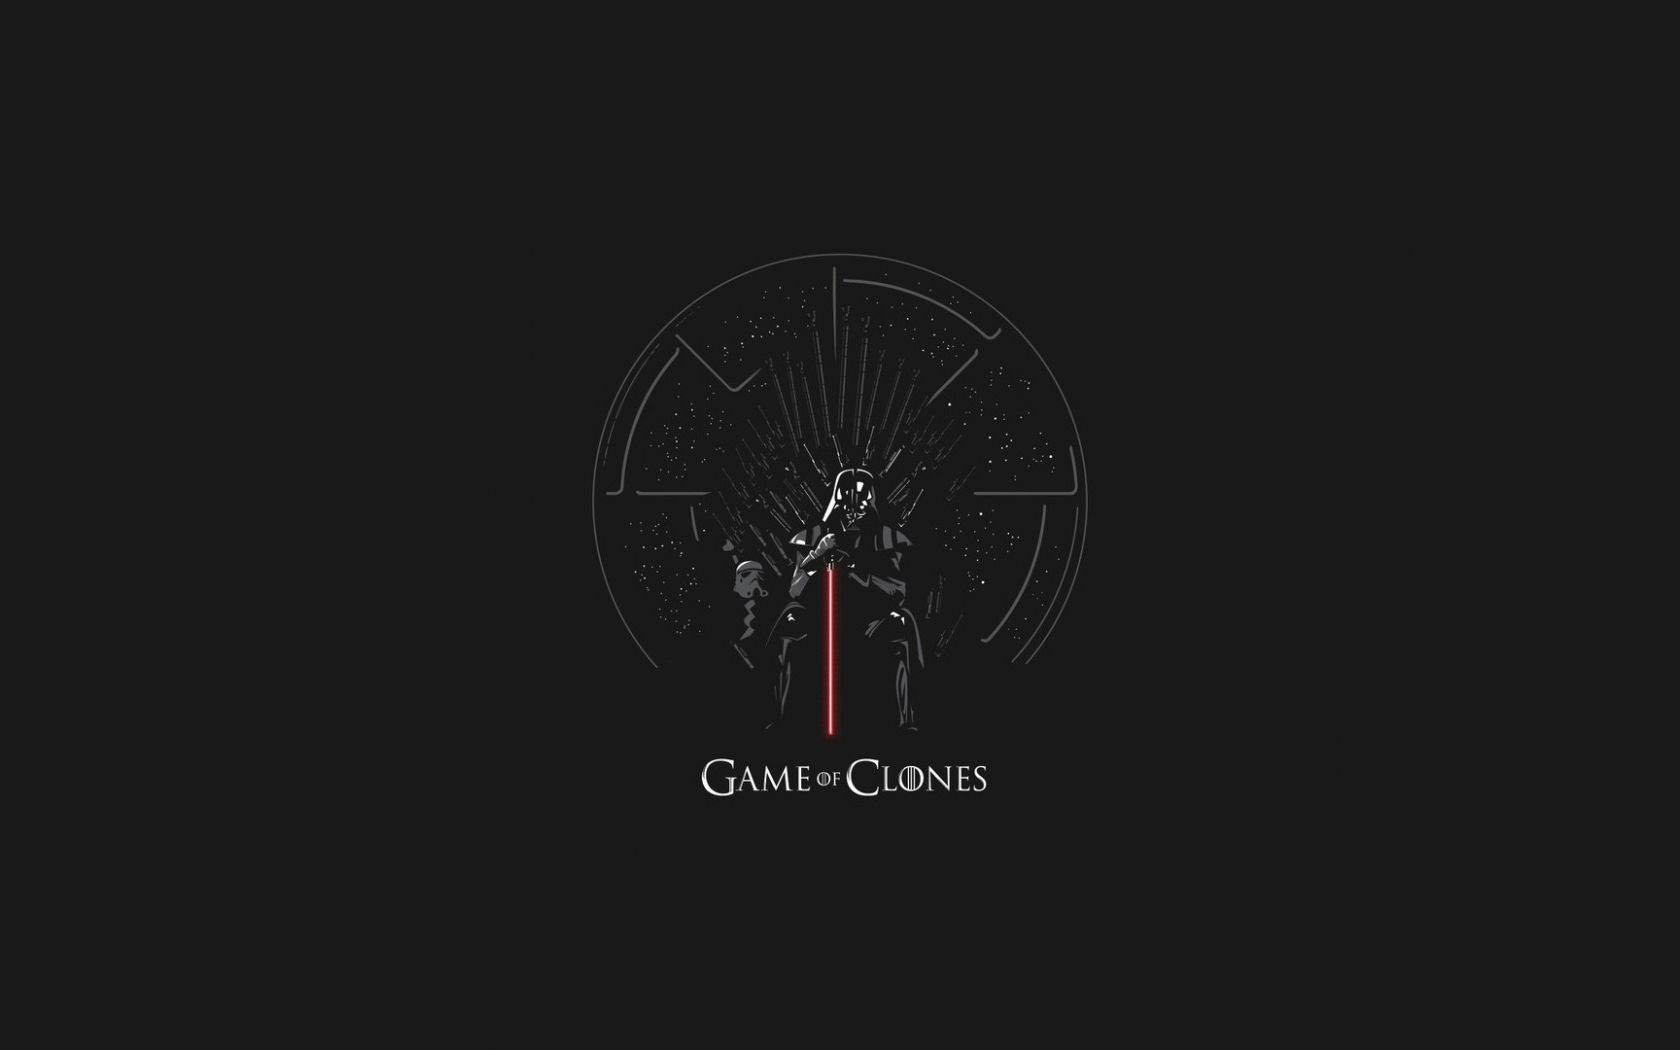 Free download Game of Thrones Star Wars wallpaper mash up simple minimalist [1920x1080] for your Desktop, Mobile & Tablet. Explore Simplistic Gaming Wallpaper. Minimalist Wallpaper, Imgur Minimalist Wallpaper, Minimalist Wallpaper Reddit